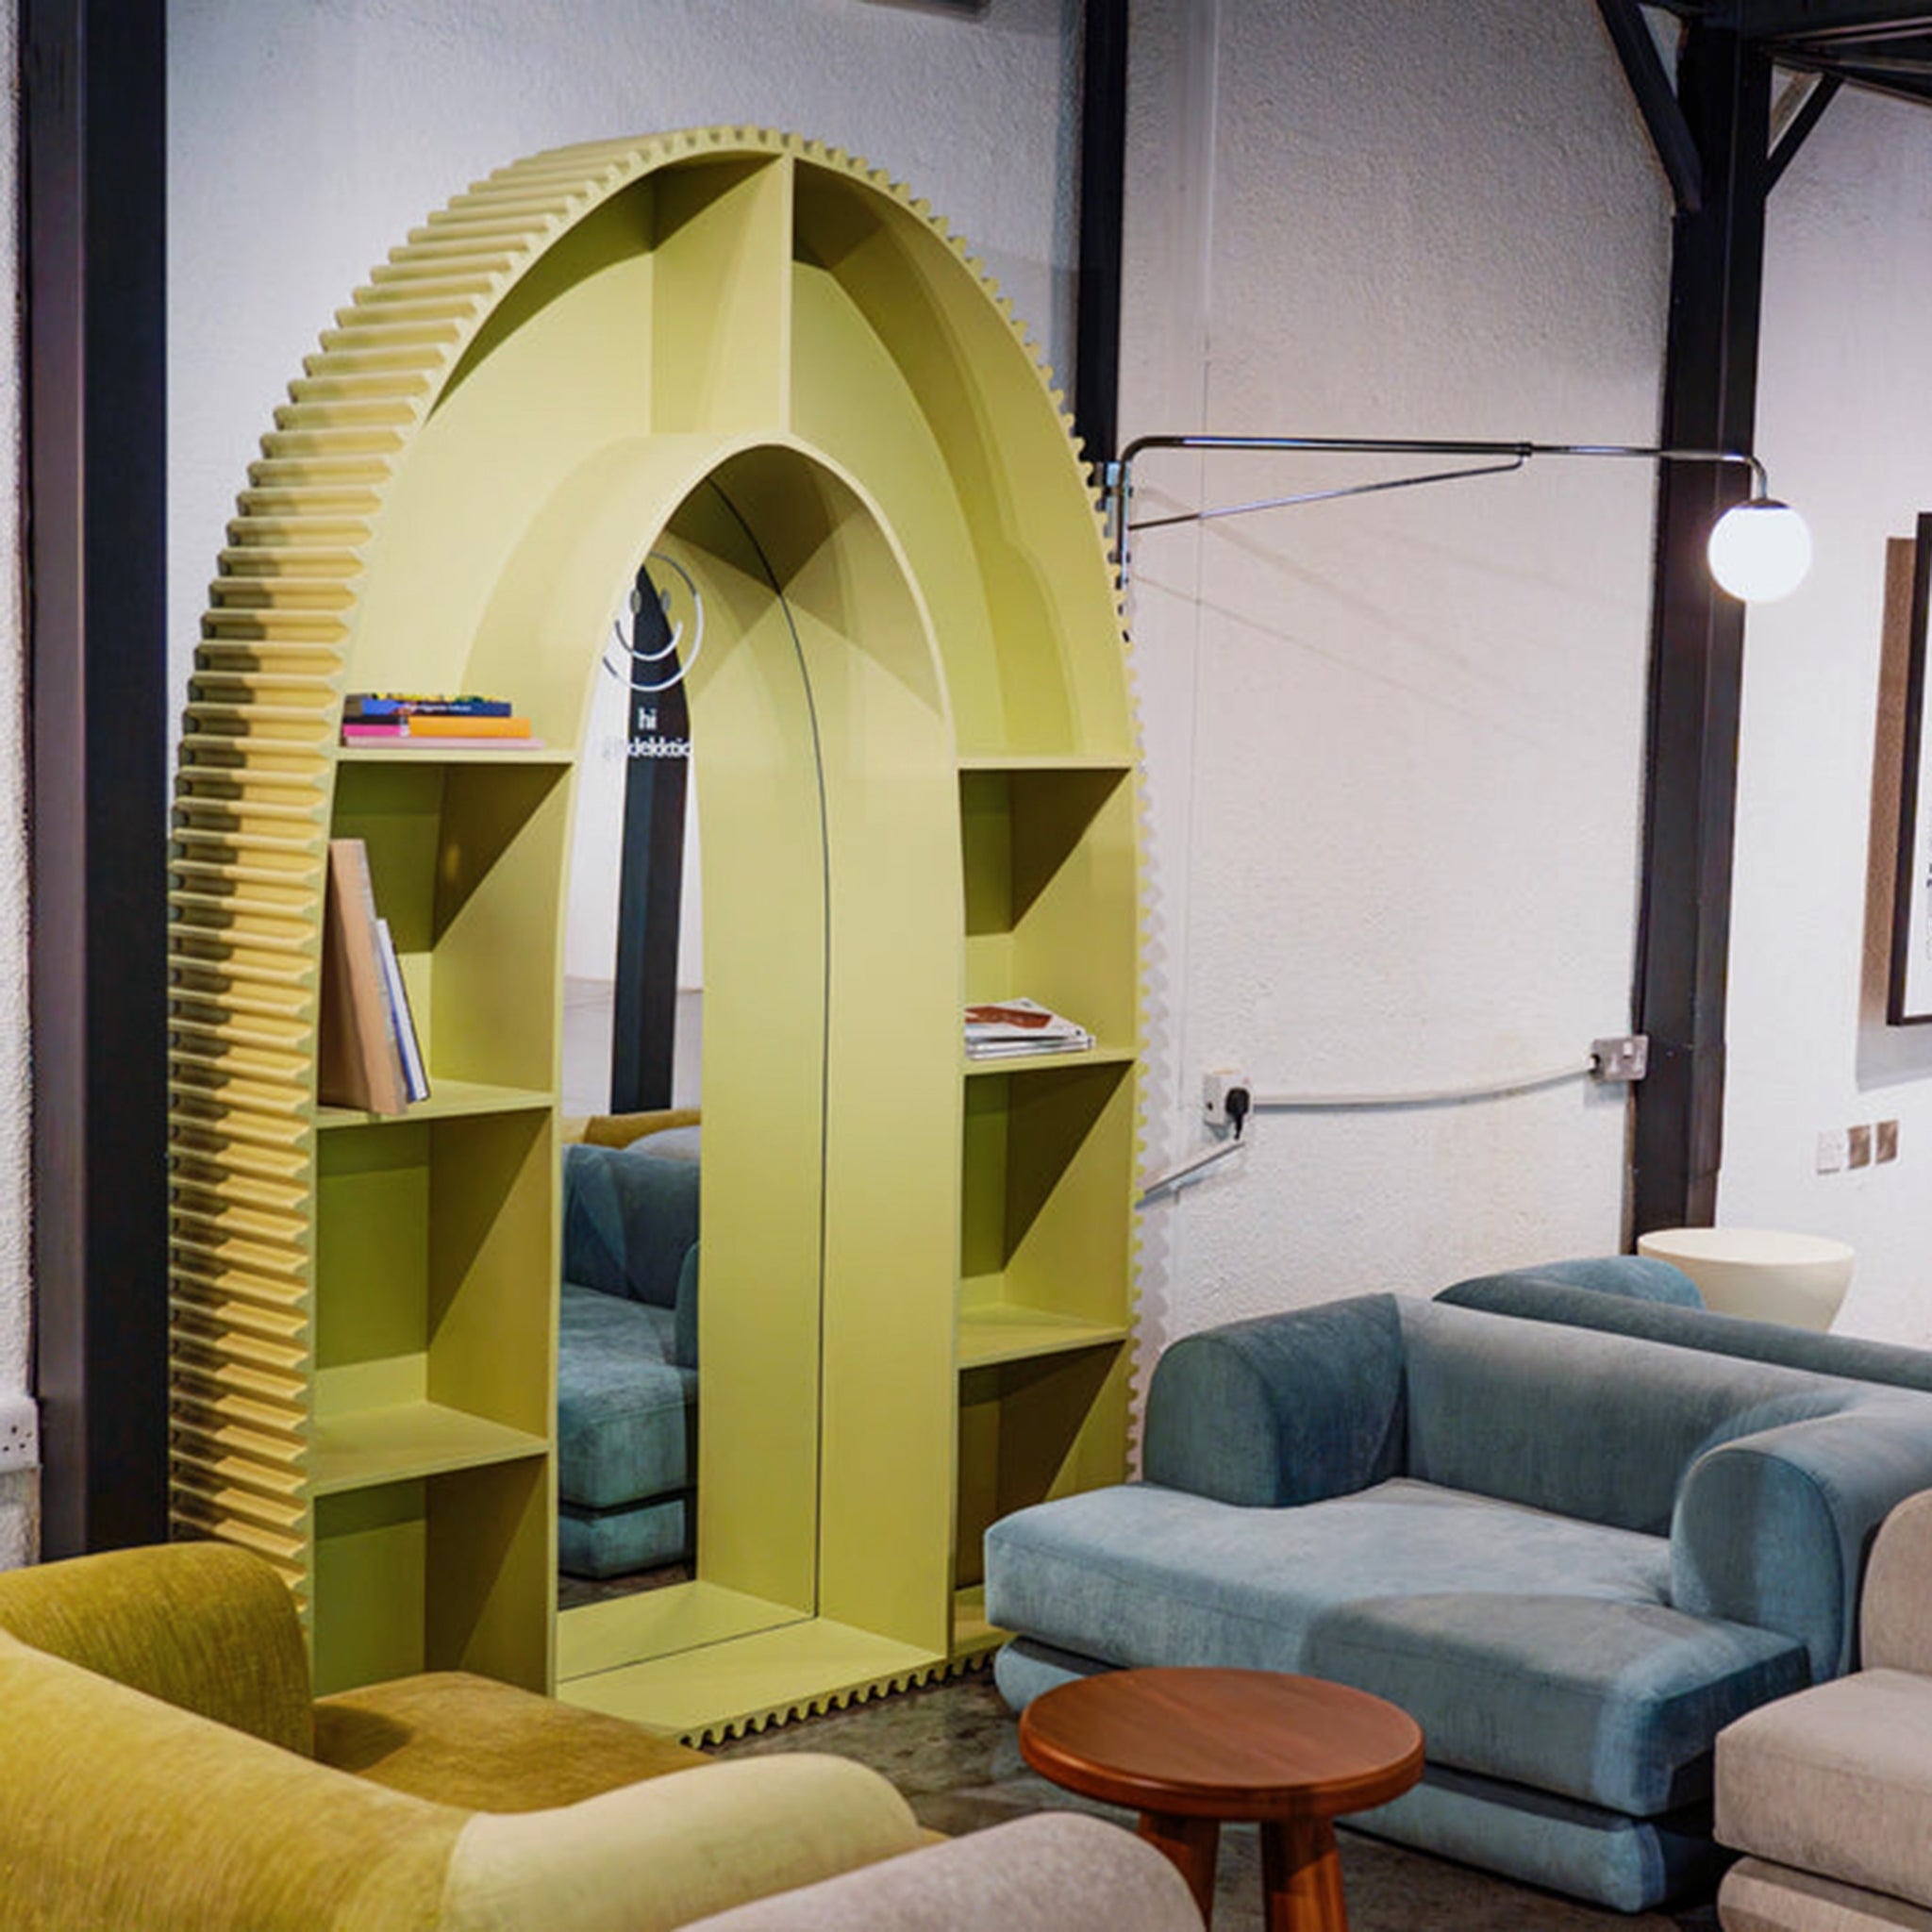 A contemporary, arch-shaped bookshelf in a vibrant yellow color with integrated mirror, situated in a modern living space. The bookshelf features grooved edges and contains books and decorative items. The area includes comfortable blue and beige sofas and a small wooden table, creating a cozy and stylish ambiance.